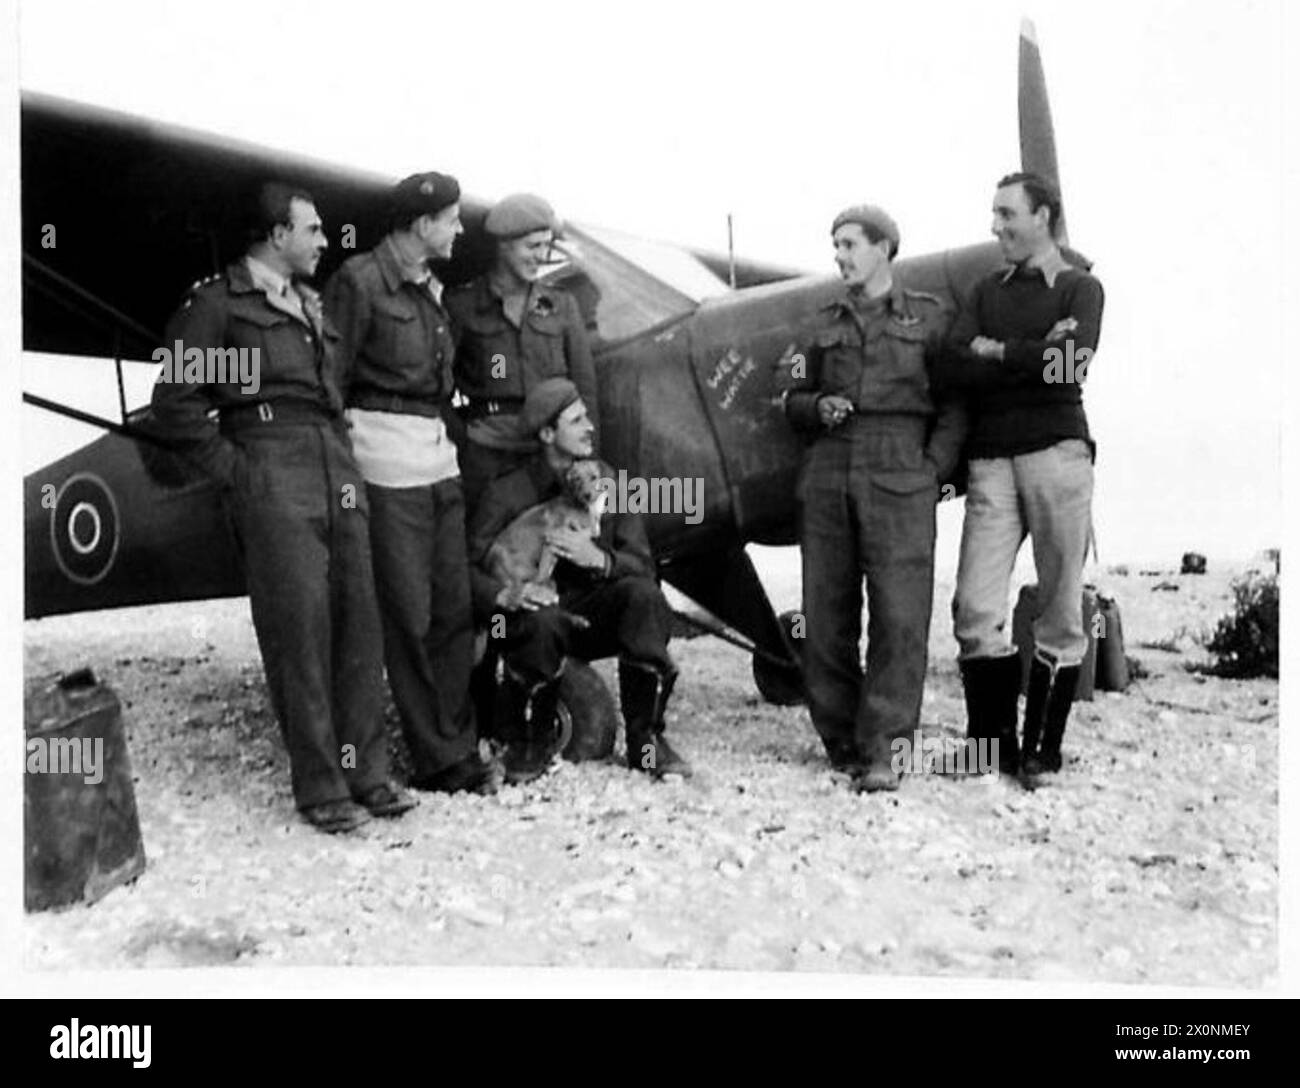 ITALY : EIGHT ARMY'THE FLYING GUNNERS' - The pilots discuss not M.Es but of the number of direct hits they have scored. They are, left to right:- Sqn.Cmdr. Capt. H.B. Warburton, R.A. of Hull Capt. J.S. Stormouth-Darling of Kelso Capt. E.D. War of Walton Abbey, G.P.A. Thompson of Bridgeworth Capt. C.G.V. Conely of Edinburgh Capt. C.J. Huttenbach of Kineton. The dog seen in the picture is 'Lady' the mascot. Photographic negative , British Army Stock Photo